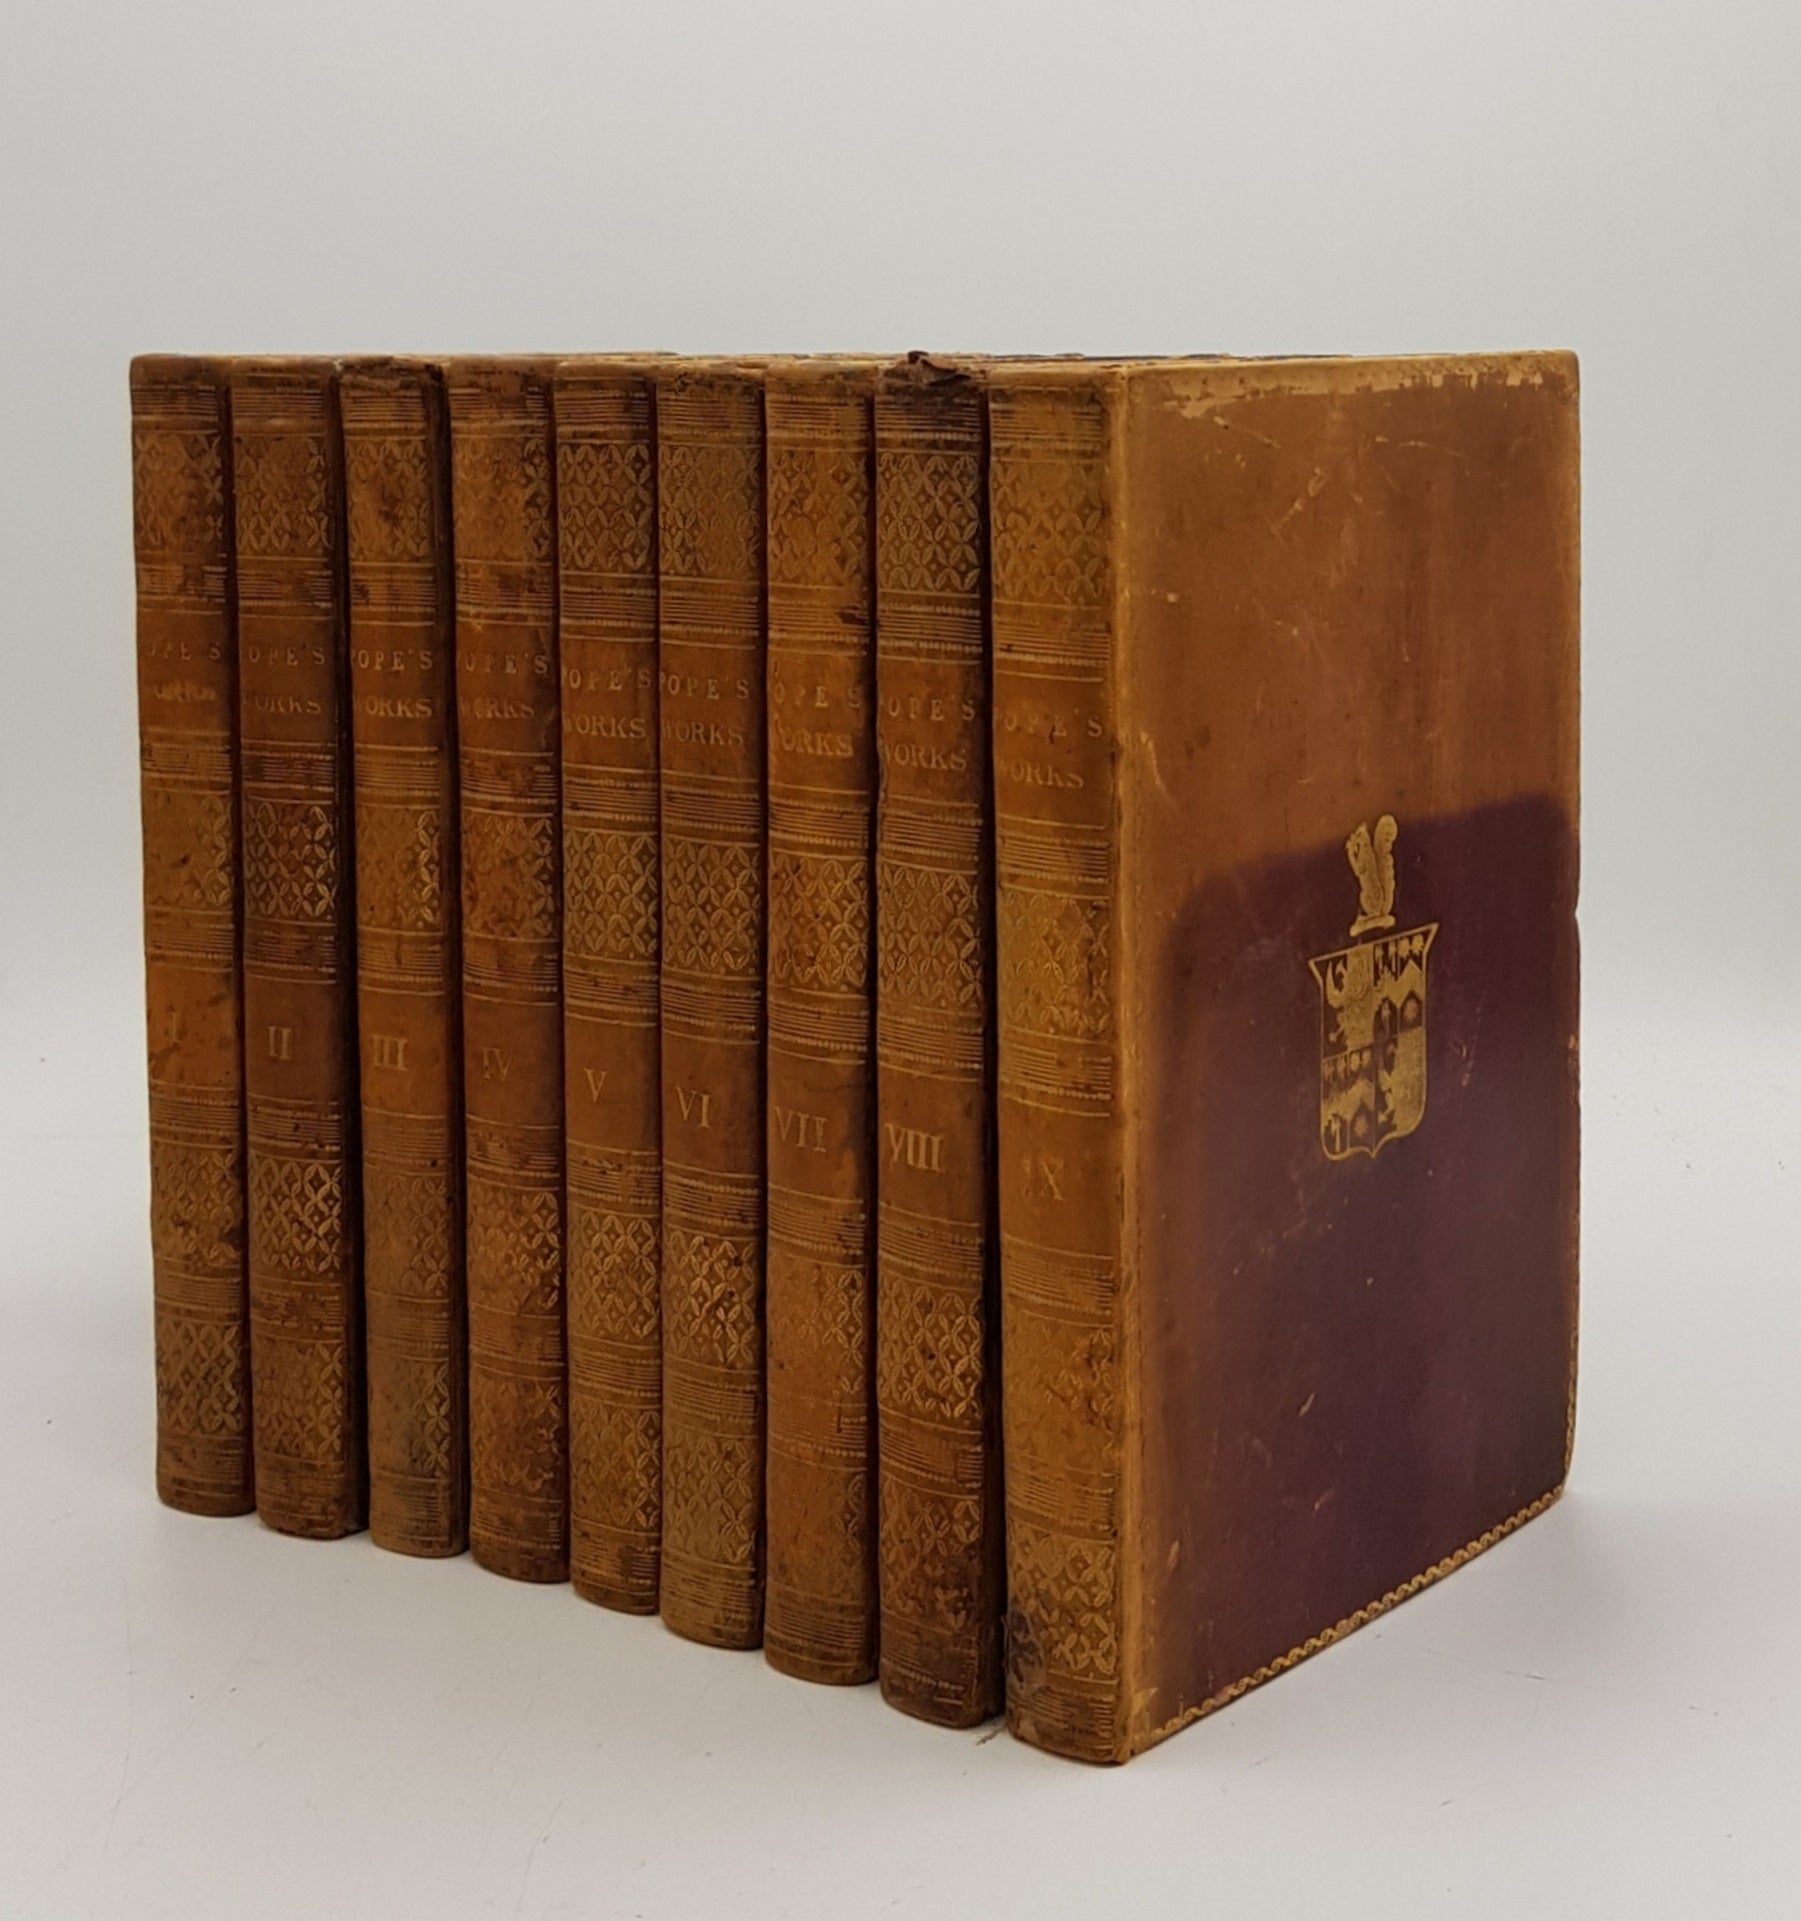 POPE Alexander, WHARTON Joseph - The Works of Alexander Pope with Notes and Illustrations New Edition Complete in 9 Volumes